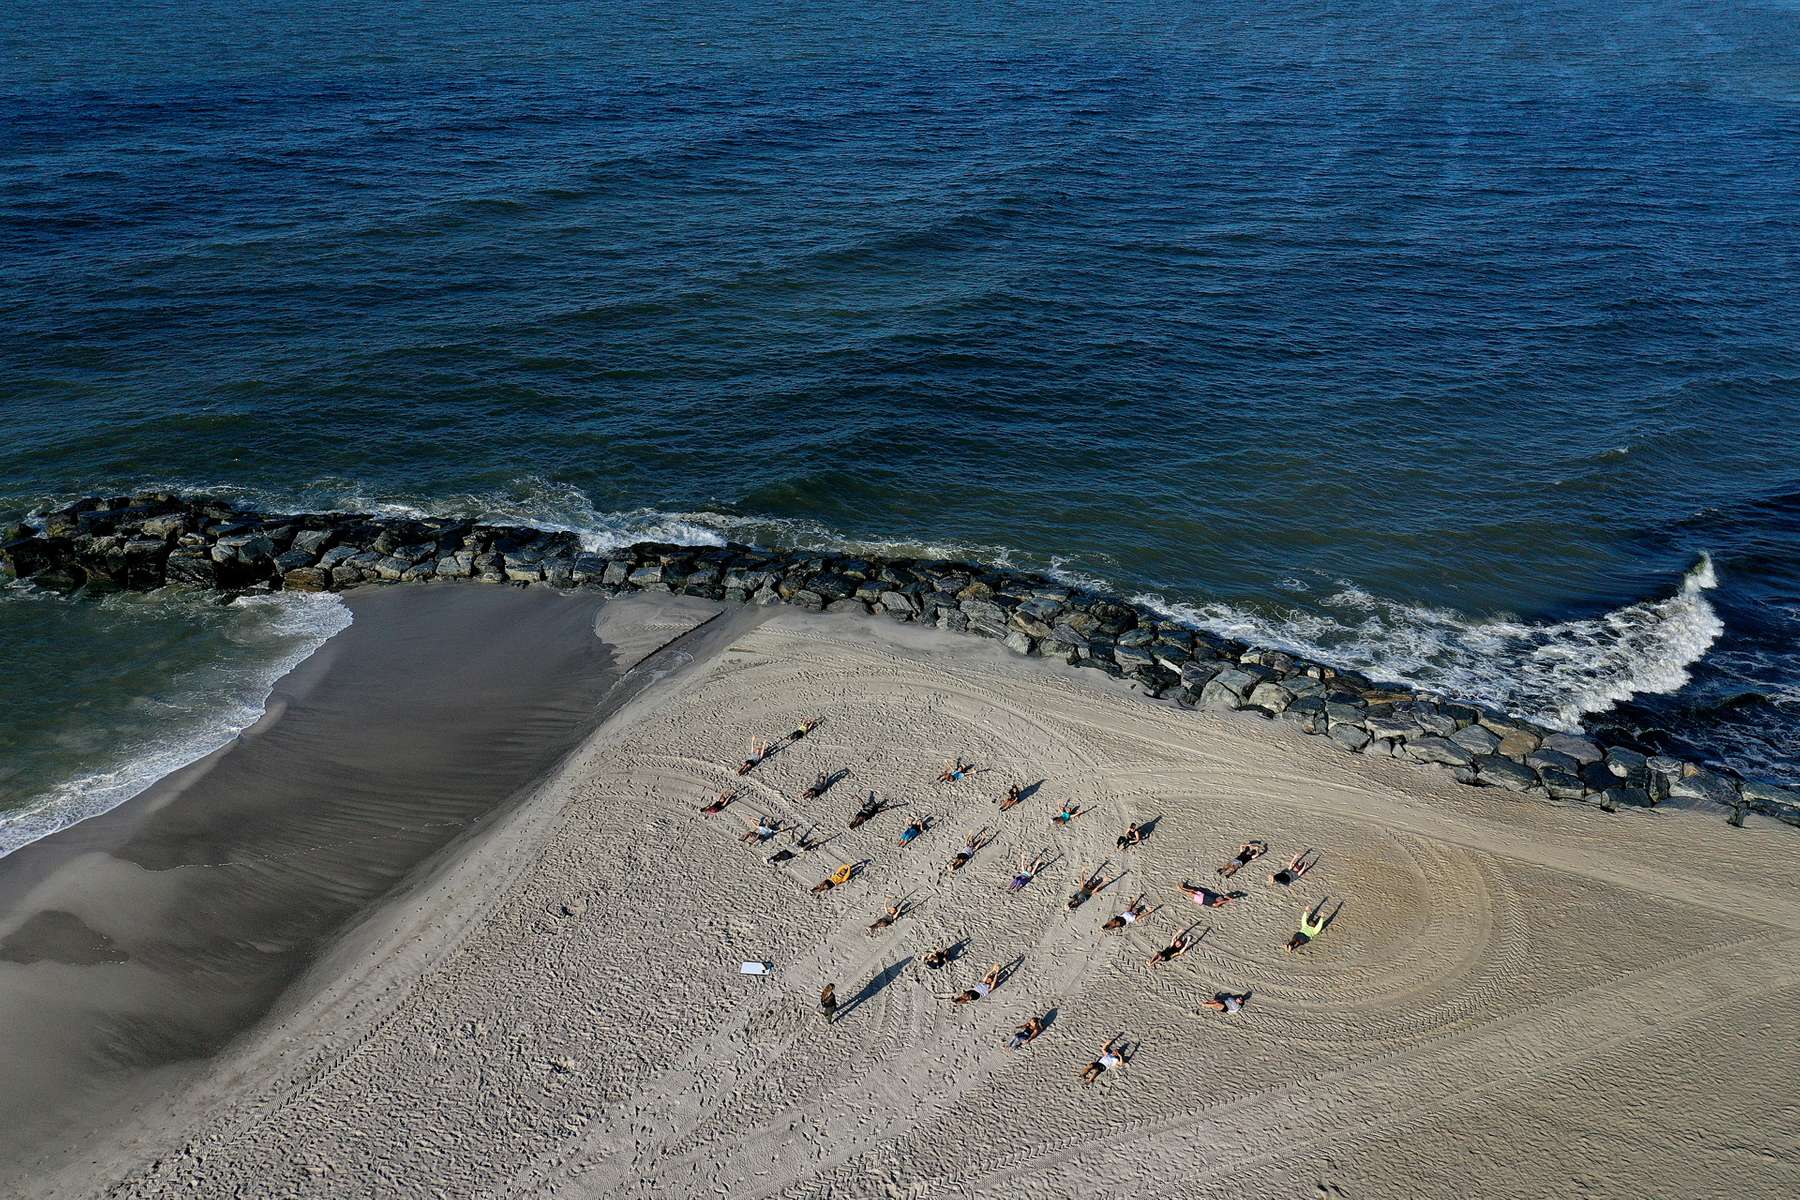 An aerial view of members of the {quote}Life Outside The Box {quote} Fitness Club during a training session led by fitness instructor Alexa Hoovis at the beach on August 18, 2020 in Long Beach, New York.  Gyms, which have been closed in New York since mid-March to help prevent the spread of the coronavirus, will be allowed to open again as soon as August 24th Governor Andrew Cuomo has announced.  Gyms will be limited to a third of their capacity, and they need to maintain a sign-in sheet to help contact tracers in case of a virus outbreak. Air filters must be able to help prevent the transmission of viral particles. People must wear masks at all times. 